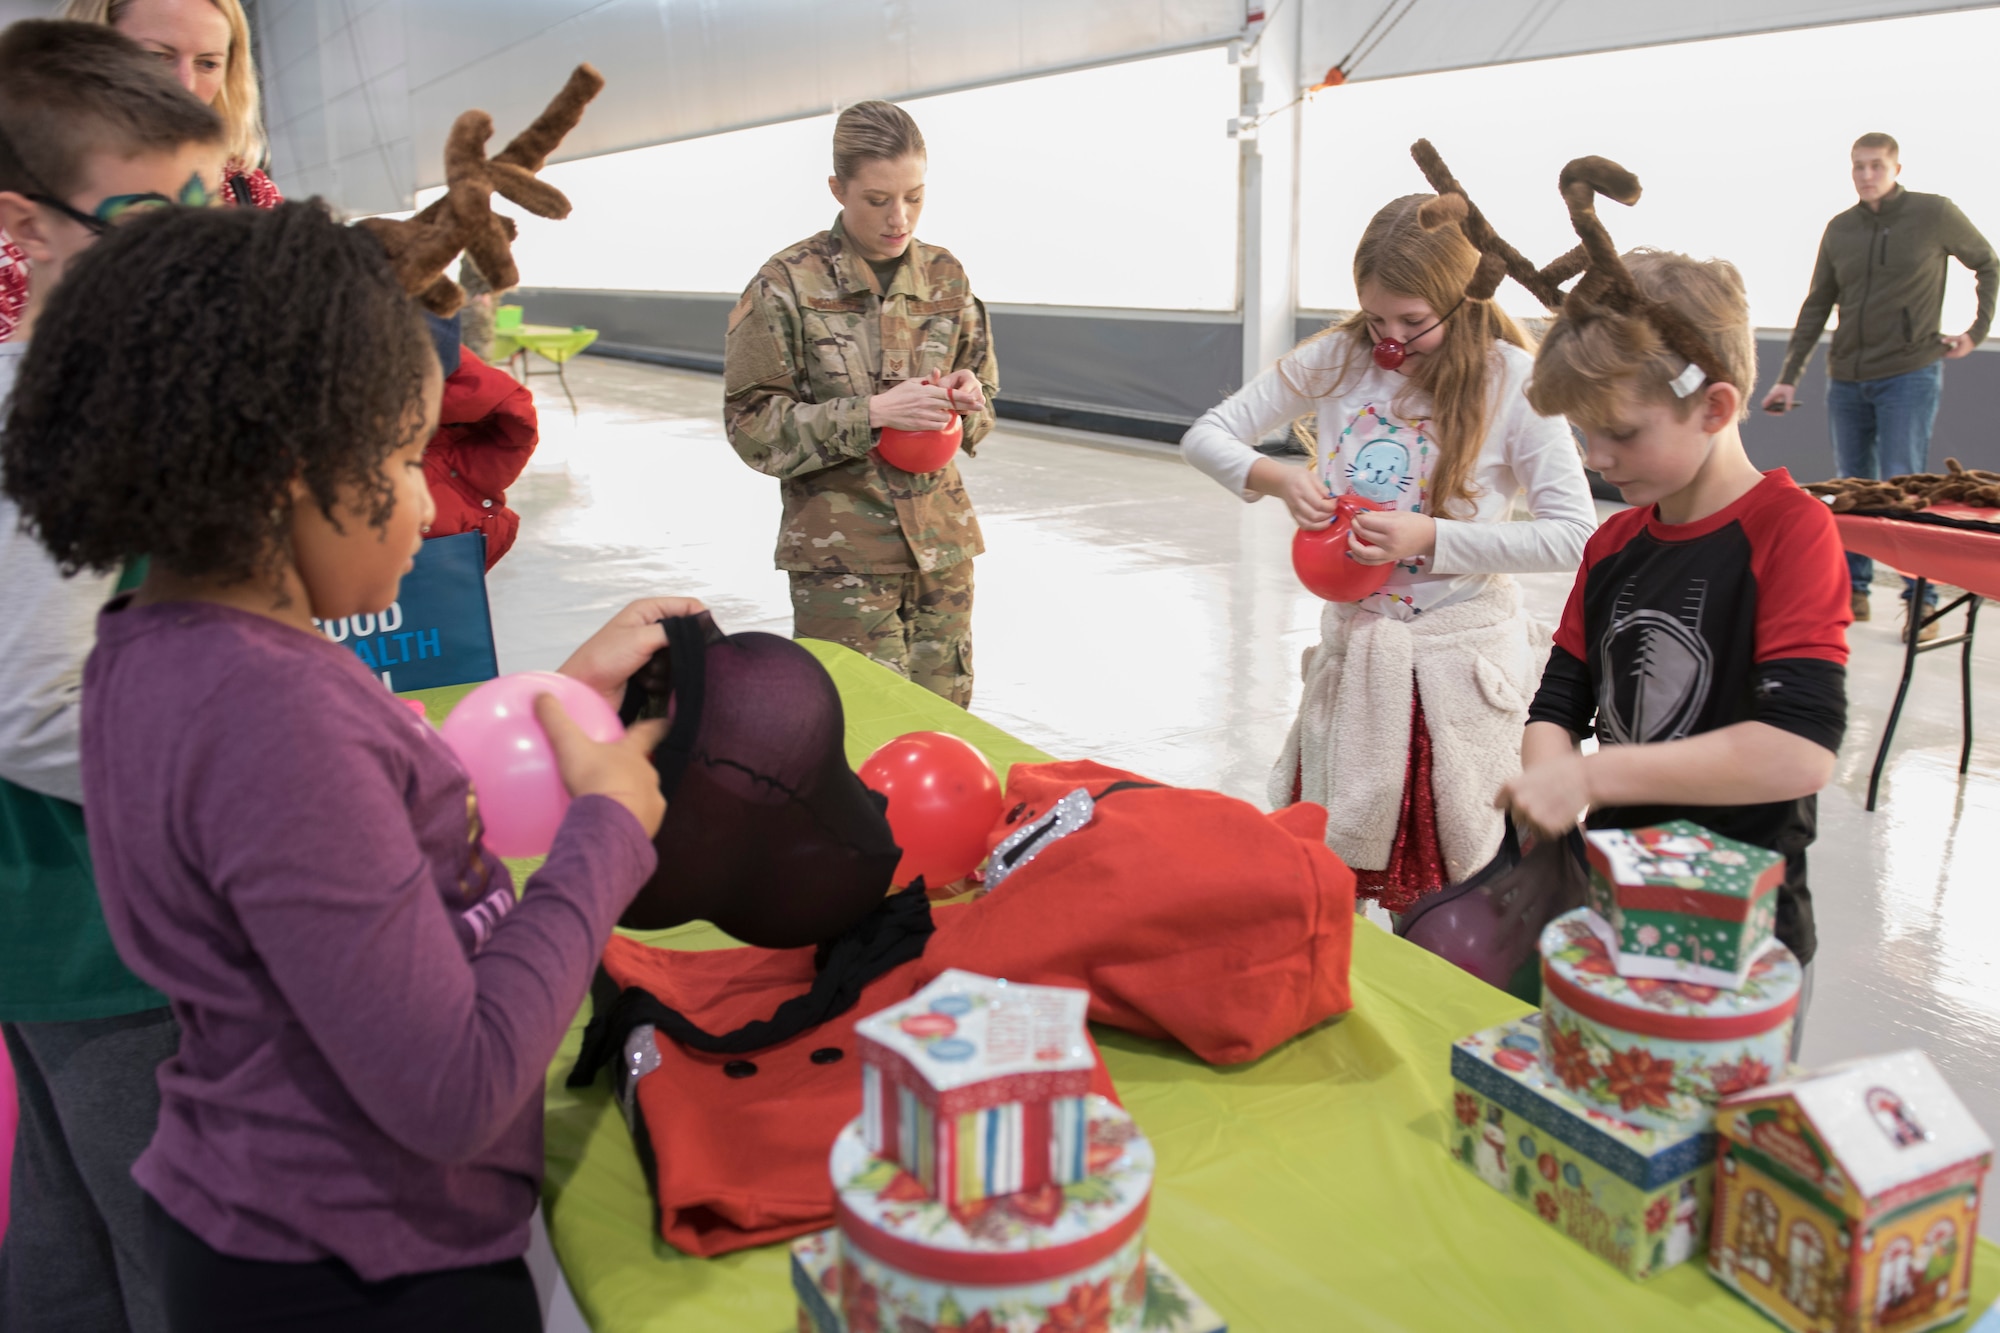 Children blow up balloons as part of the reindeer games competition during the 167th Airlift Wing family day event, Dec. 8, 2019